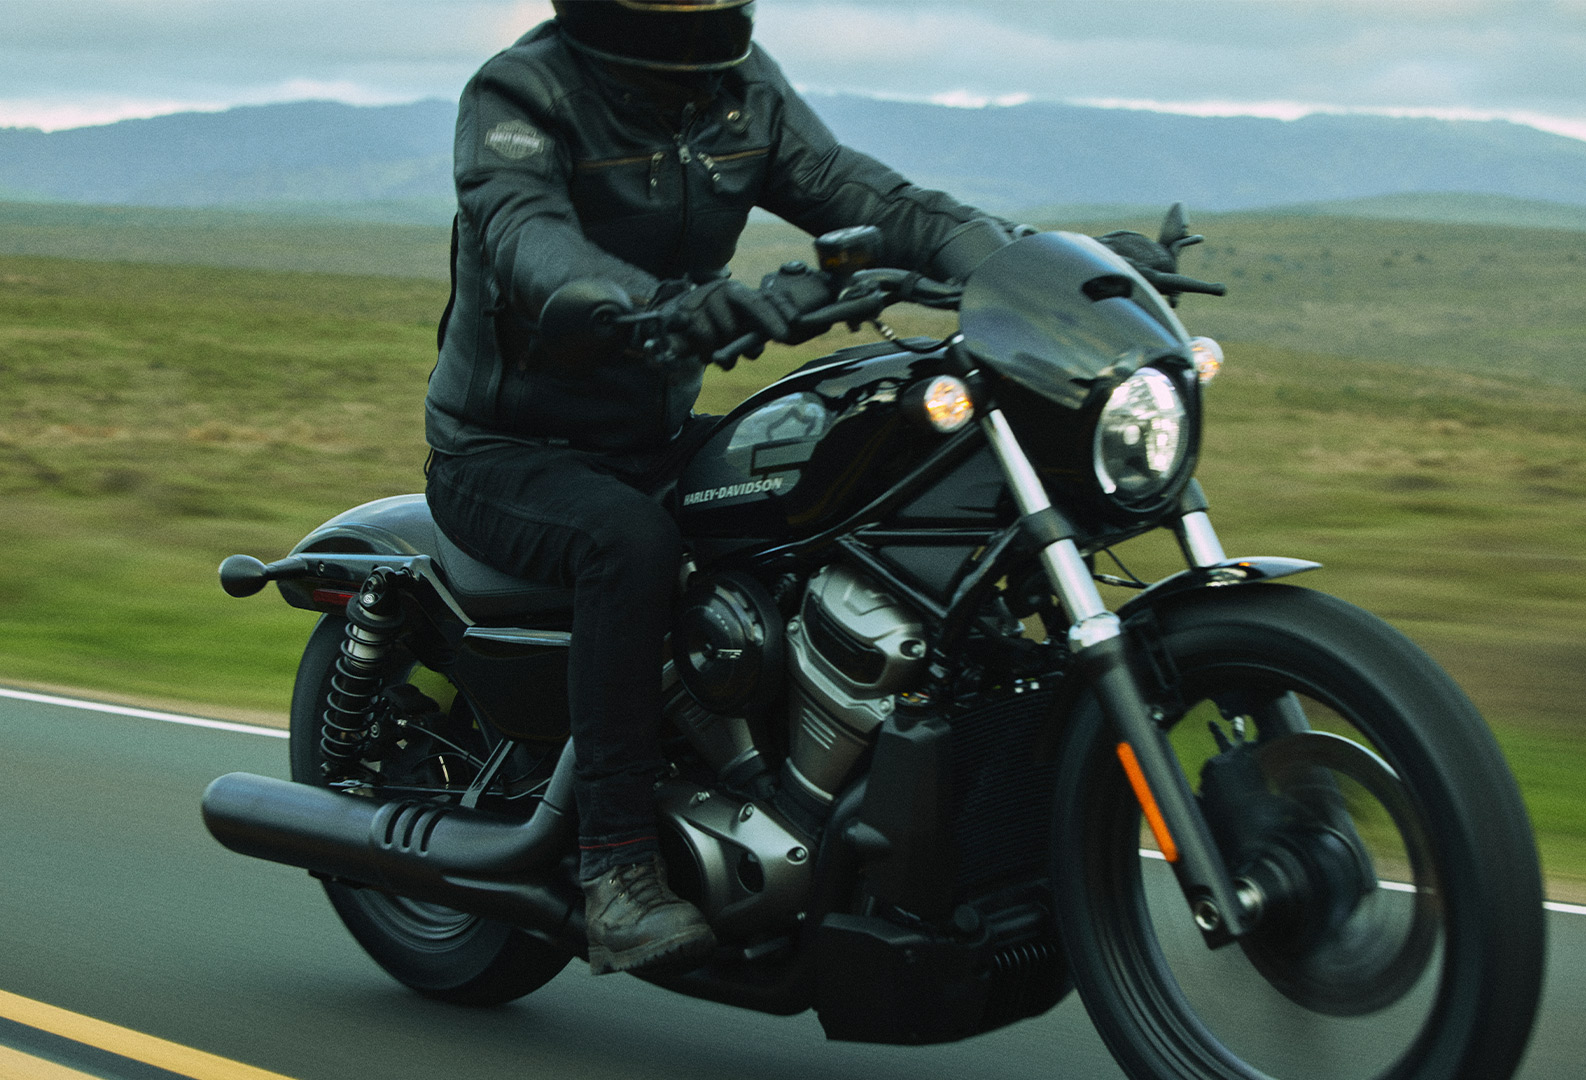 The new Harley-Davidson Nightster - Read More